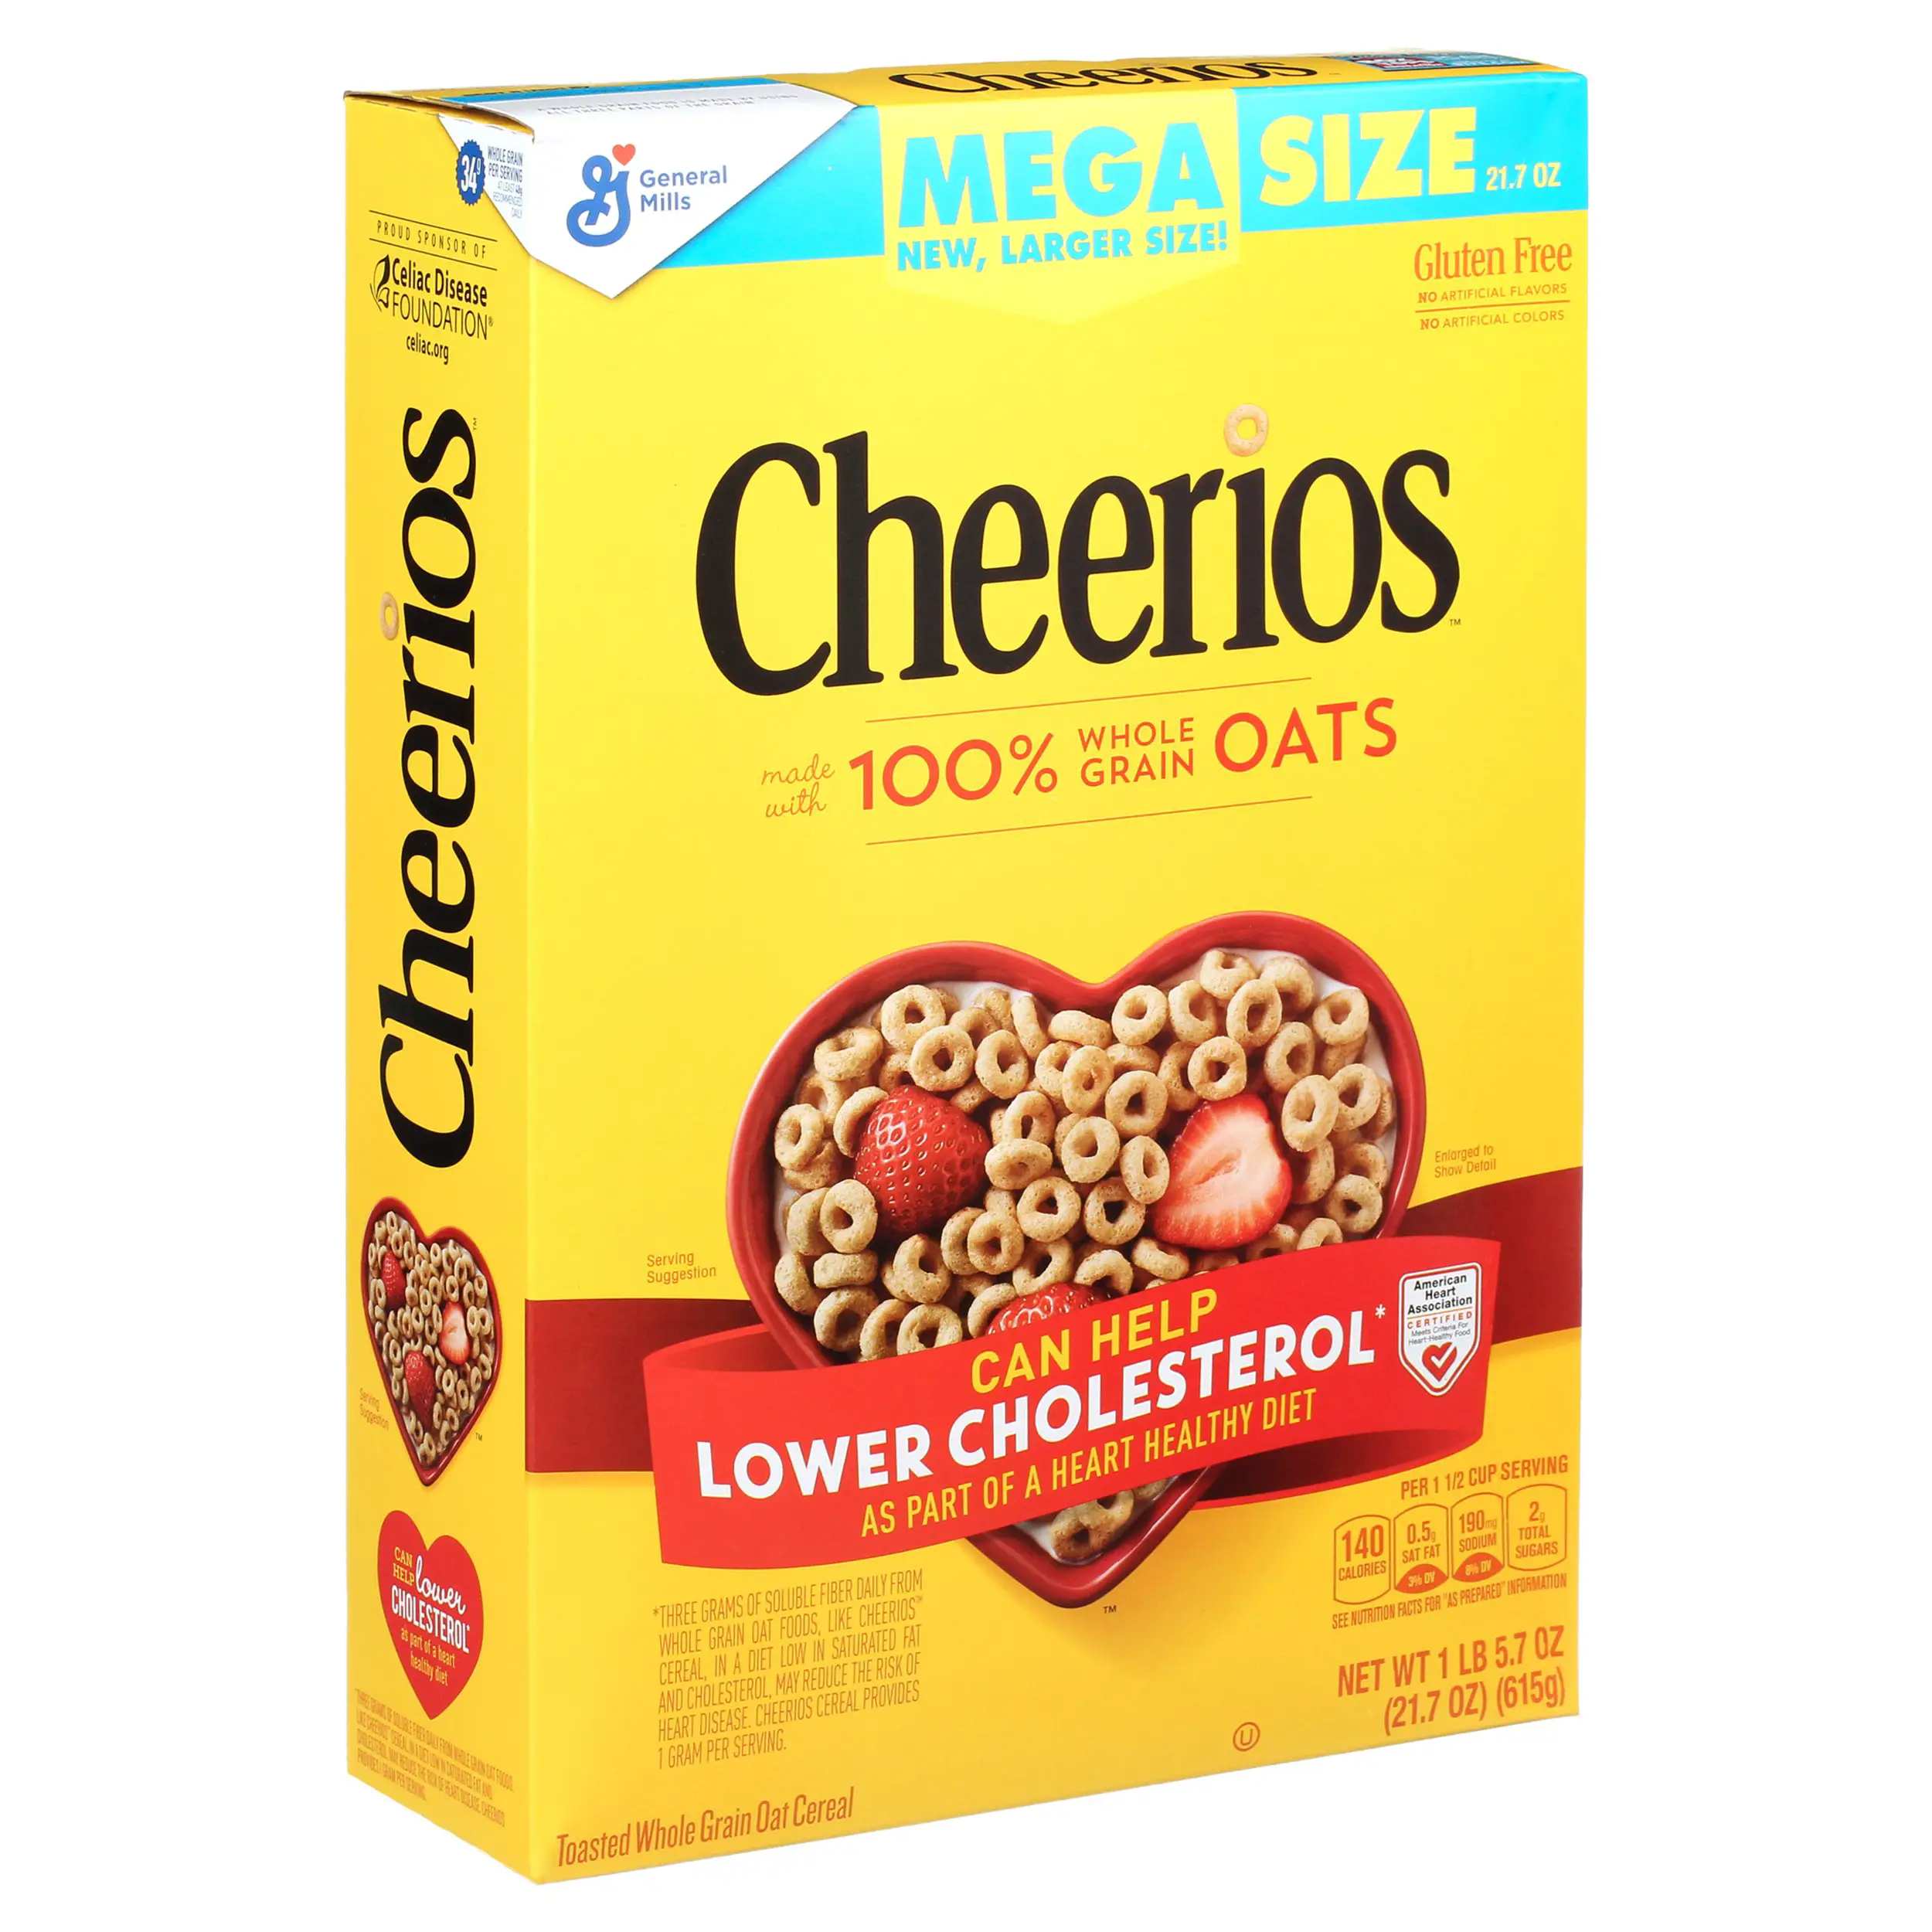 Cheerios, Gluten Free, Cereal with Whole Grain Oats, 21.7 ...